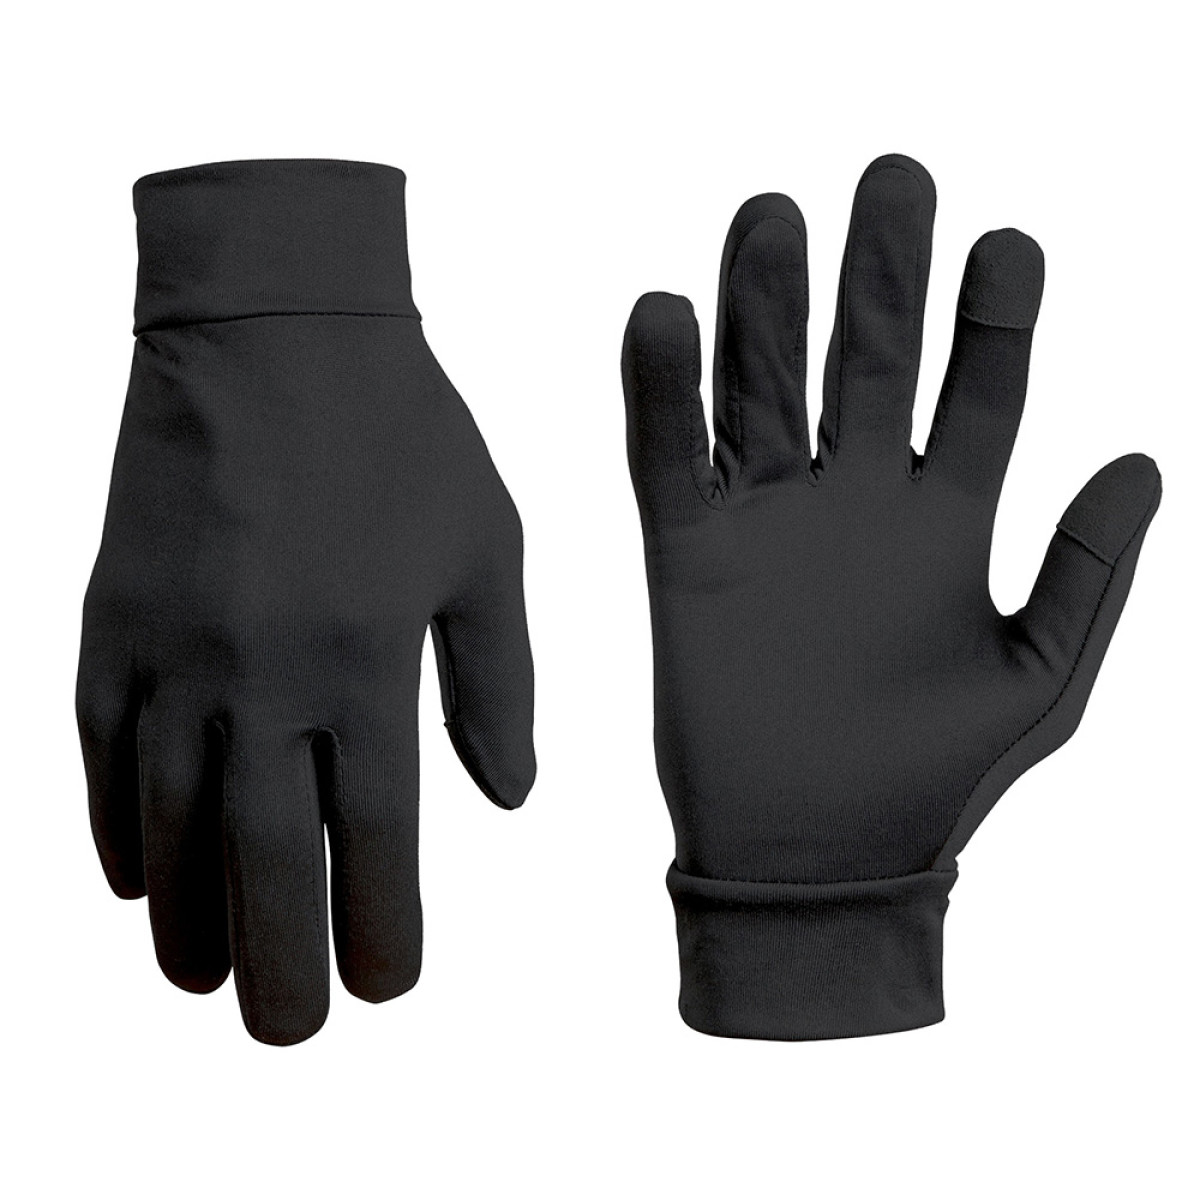 gants T.O.E thermo performer niveau 1 taille M